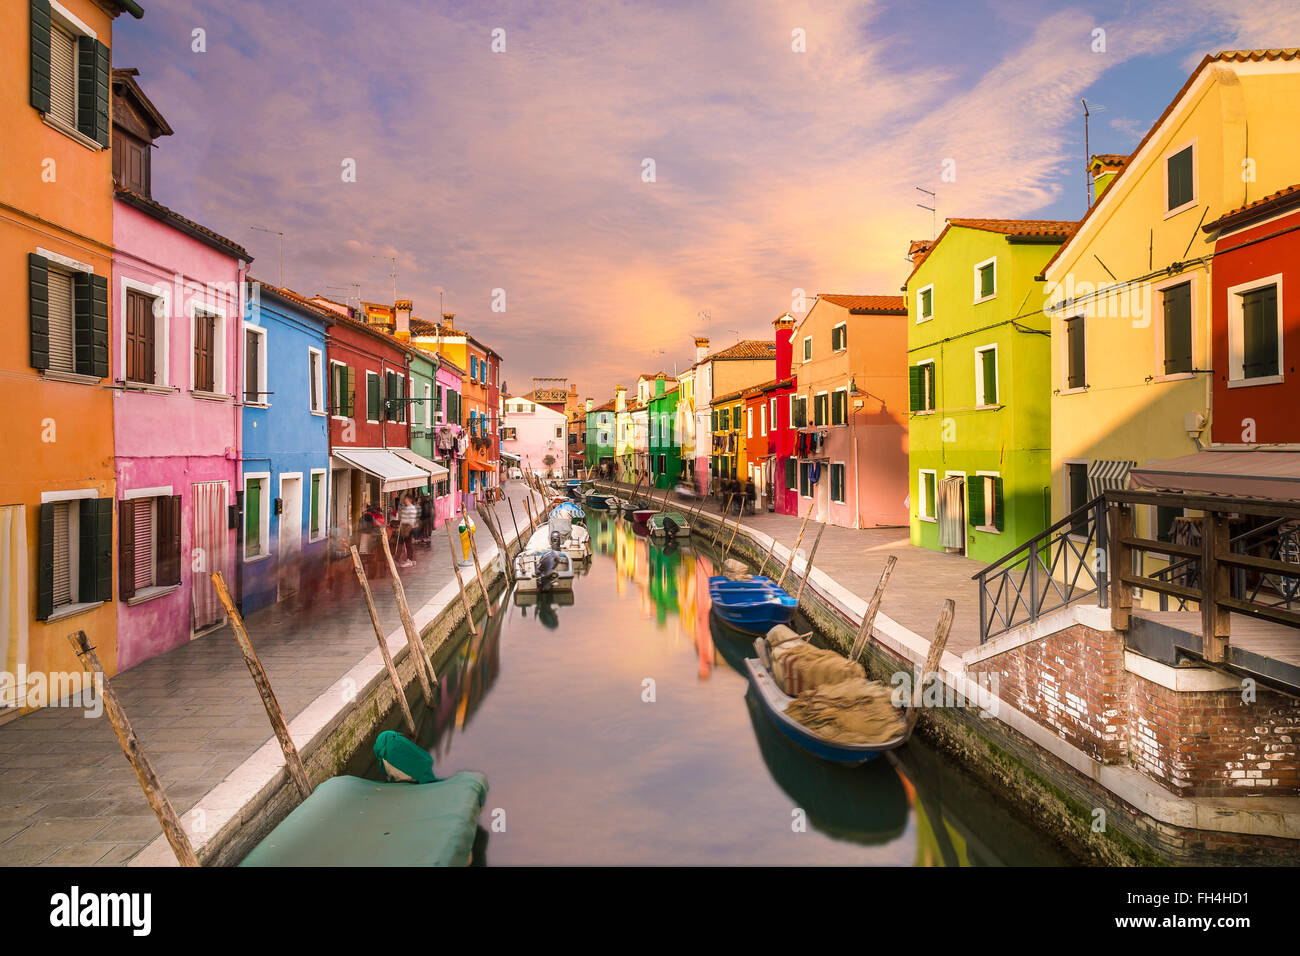 A view of colourful houses in Burano during the day along the canal. Colourful clouds can be seen in the sky. Stock Photo